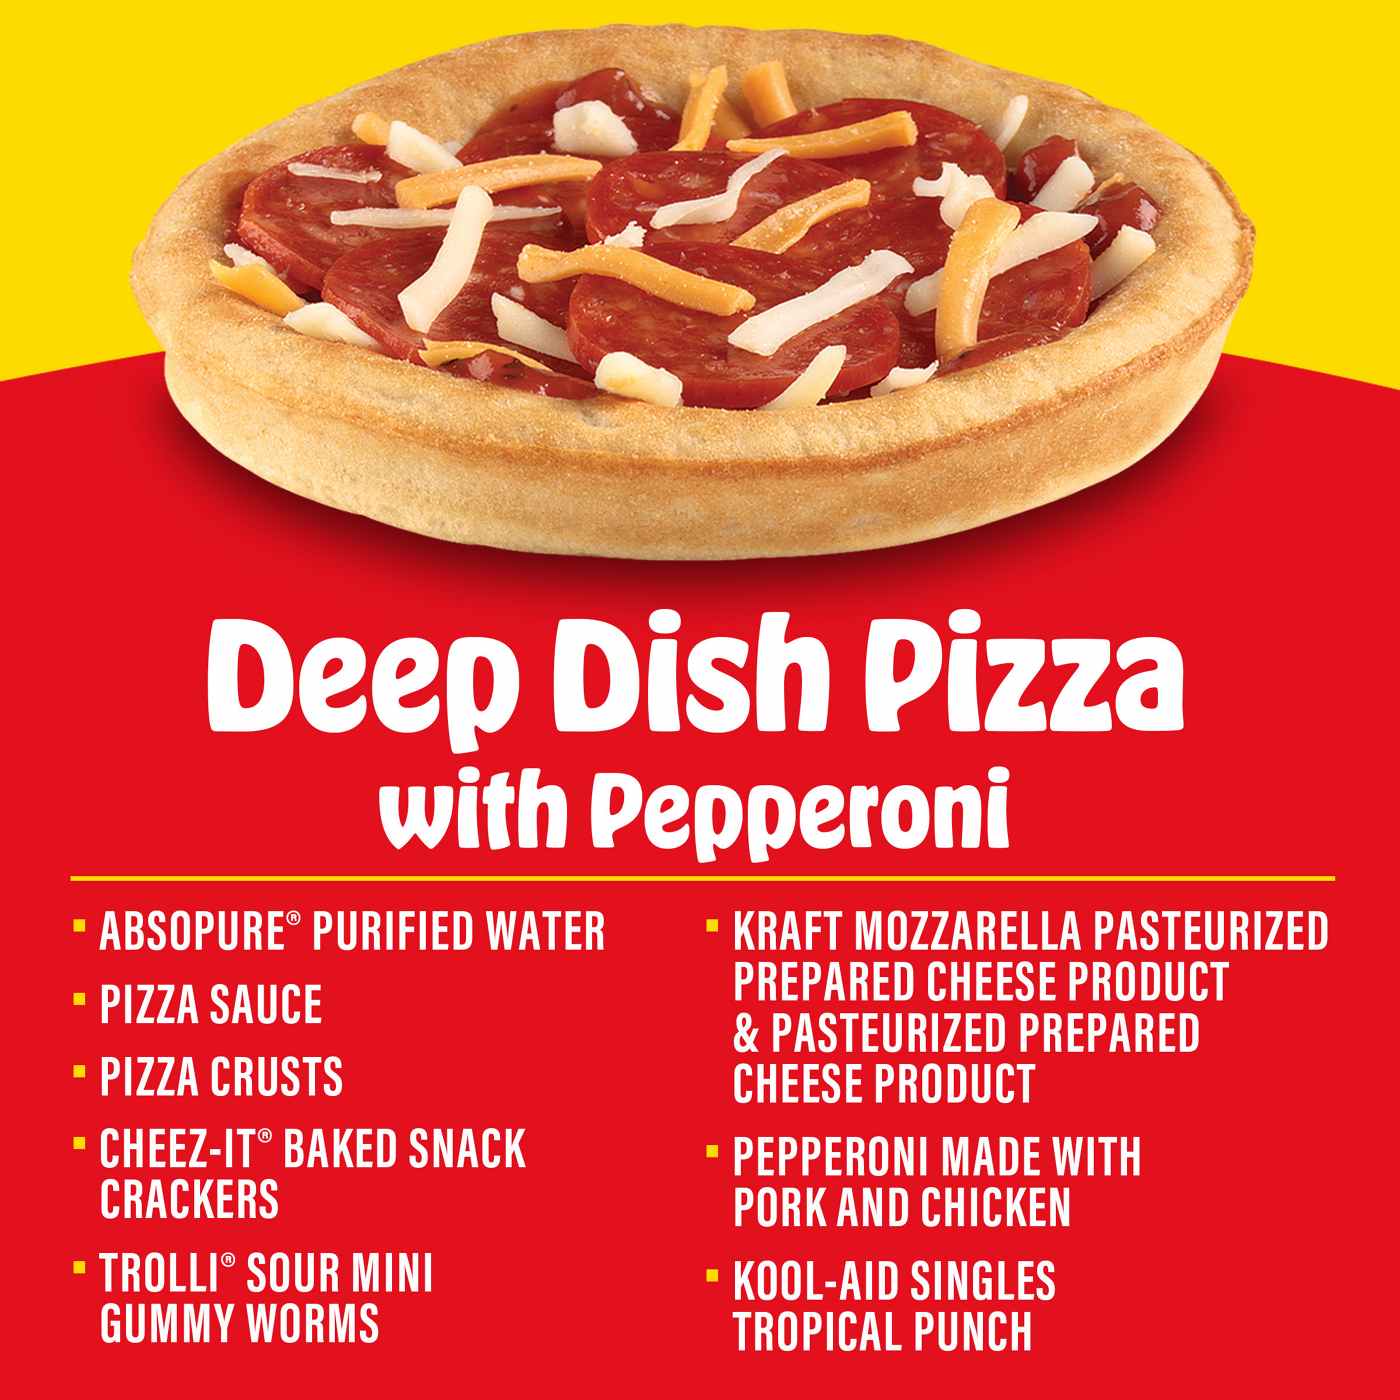 Lunchables Uploaded Meal Kit - Deep Dish Pizza with Pepperoni; image 4 of 5